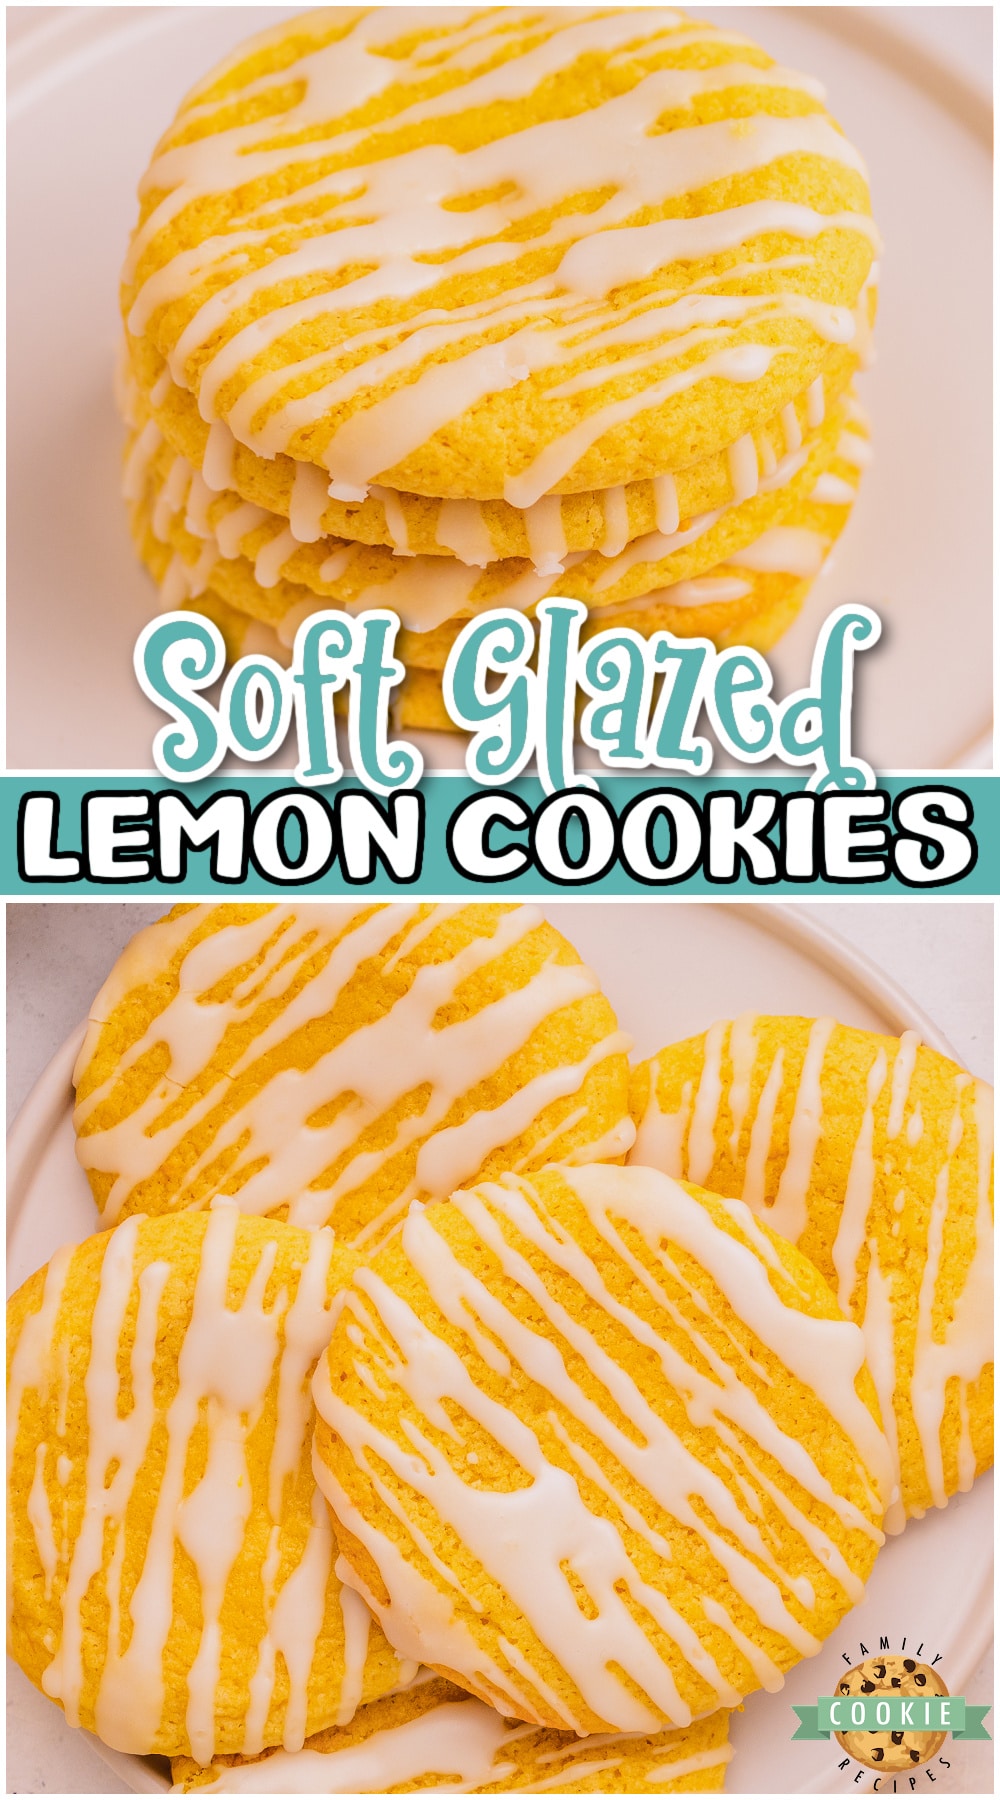 We hope you enjoy these Soft Glazed Lemon Cookies as much as we do, perfect for any occasion they are sure to be a dreamy treat for everyone! 